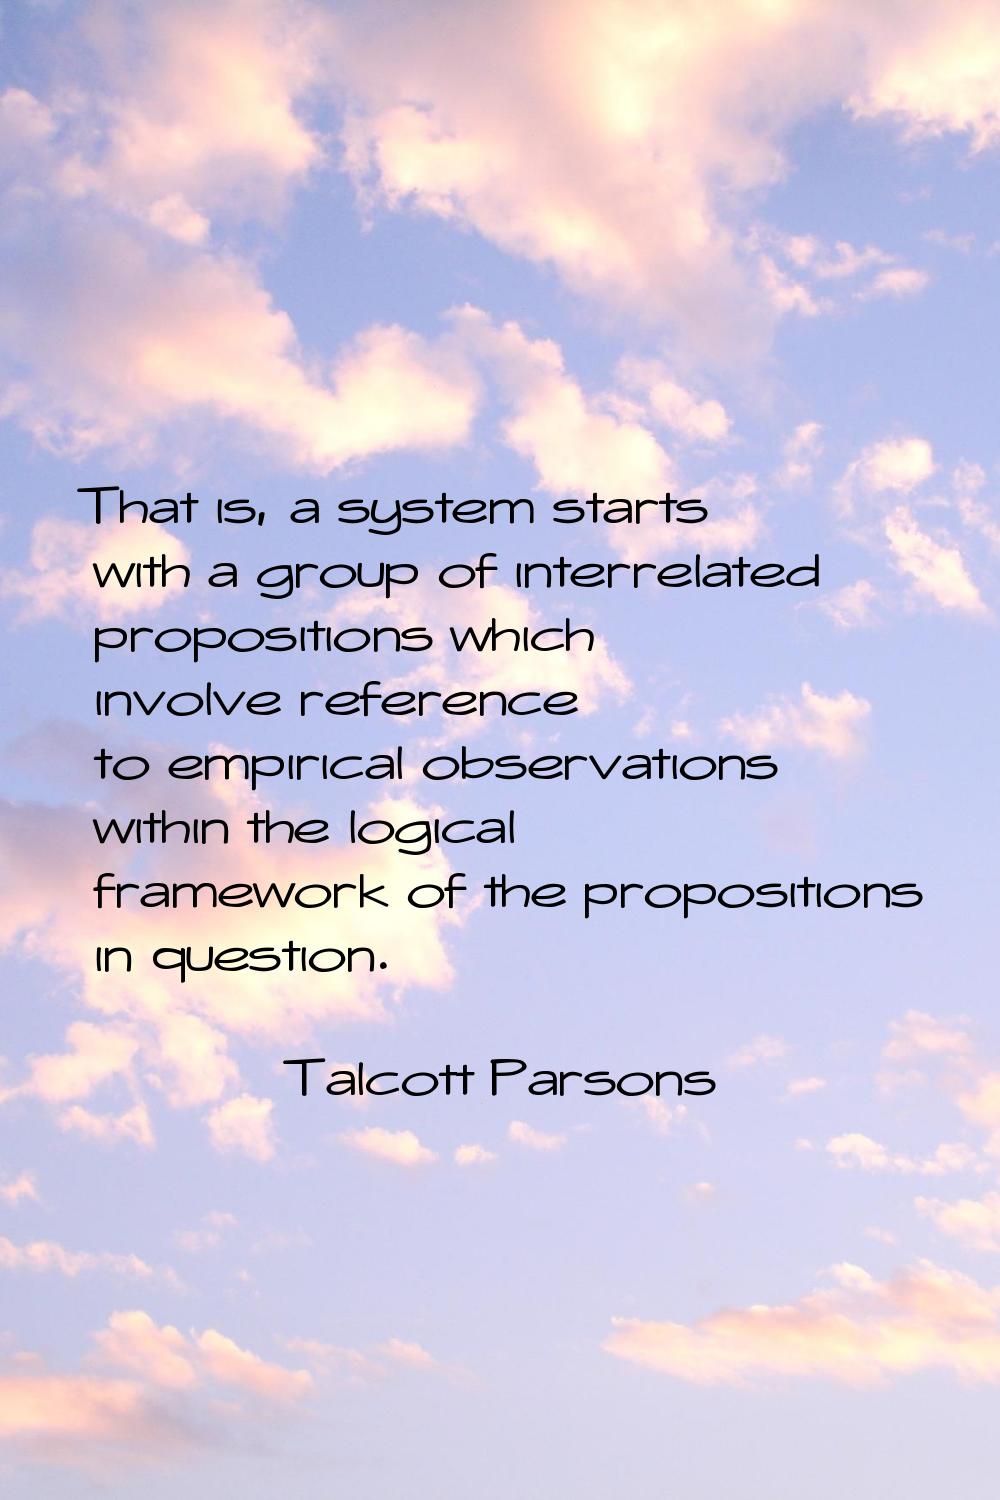 That is, a system starts with a group of interrelated propositions which involve reference to empir